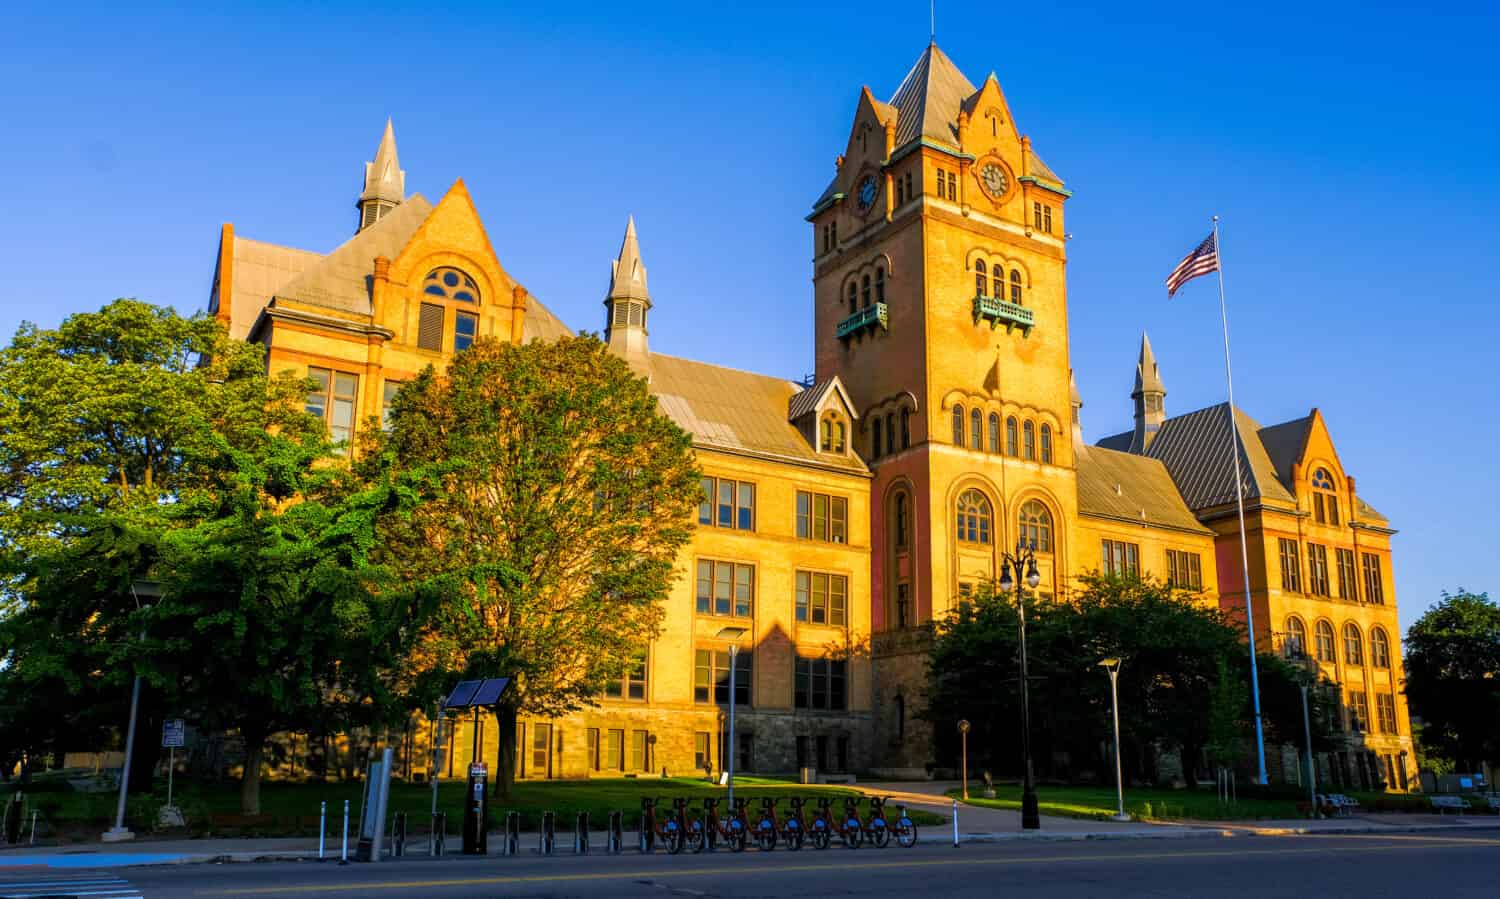 An exotic, antique-style castle with golden dawn sunlight. The castle is known as 'Old Main" building located in Wayne State University area, Midtown, Detroit, Michigan, USA.